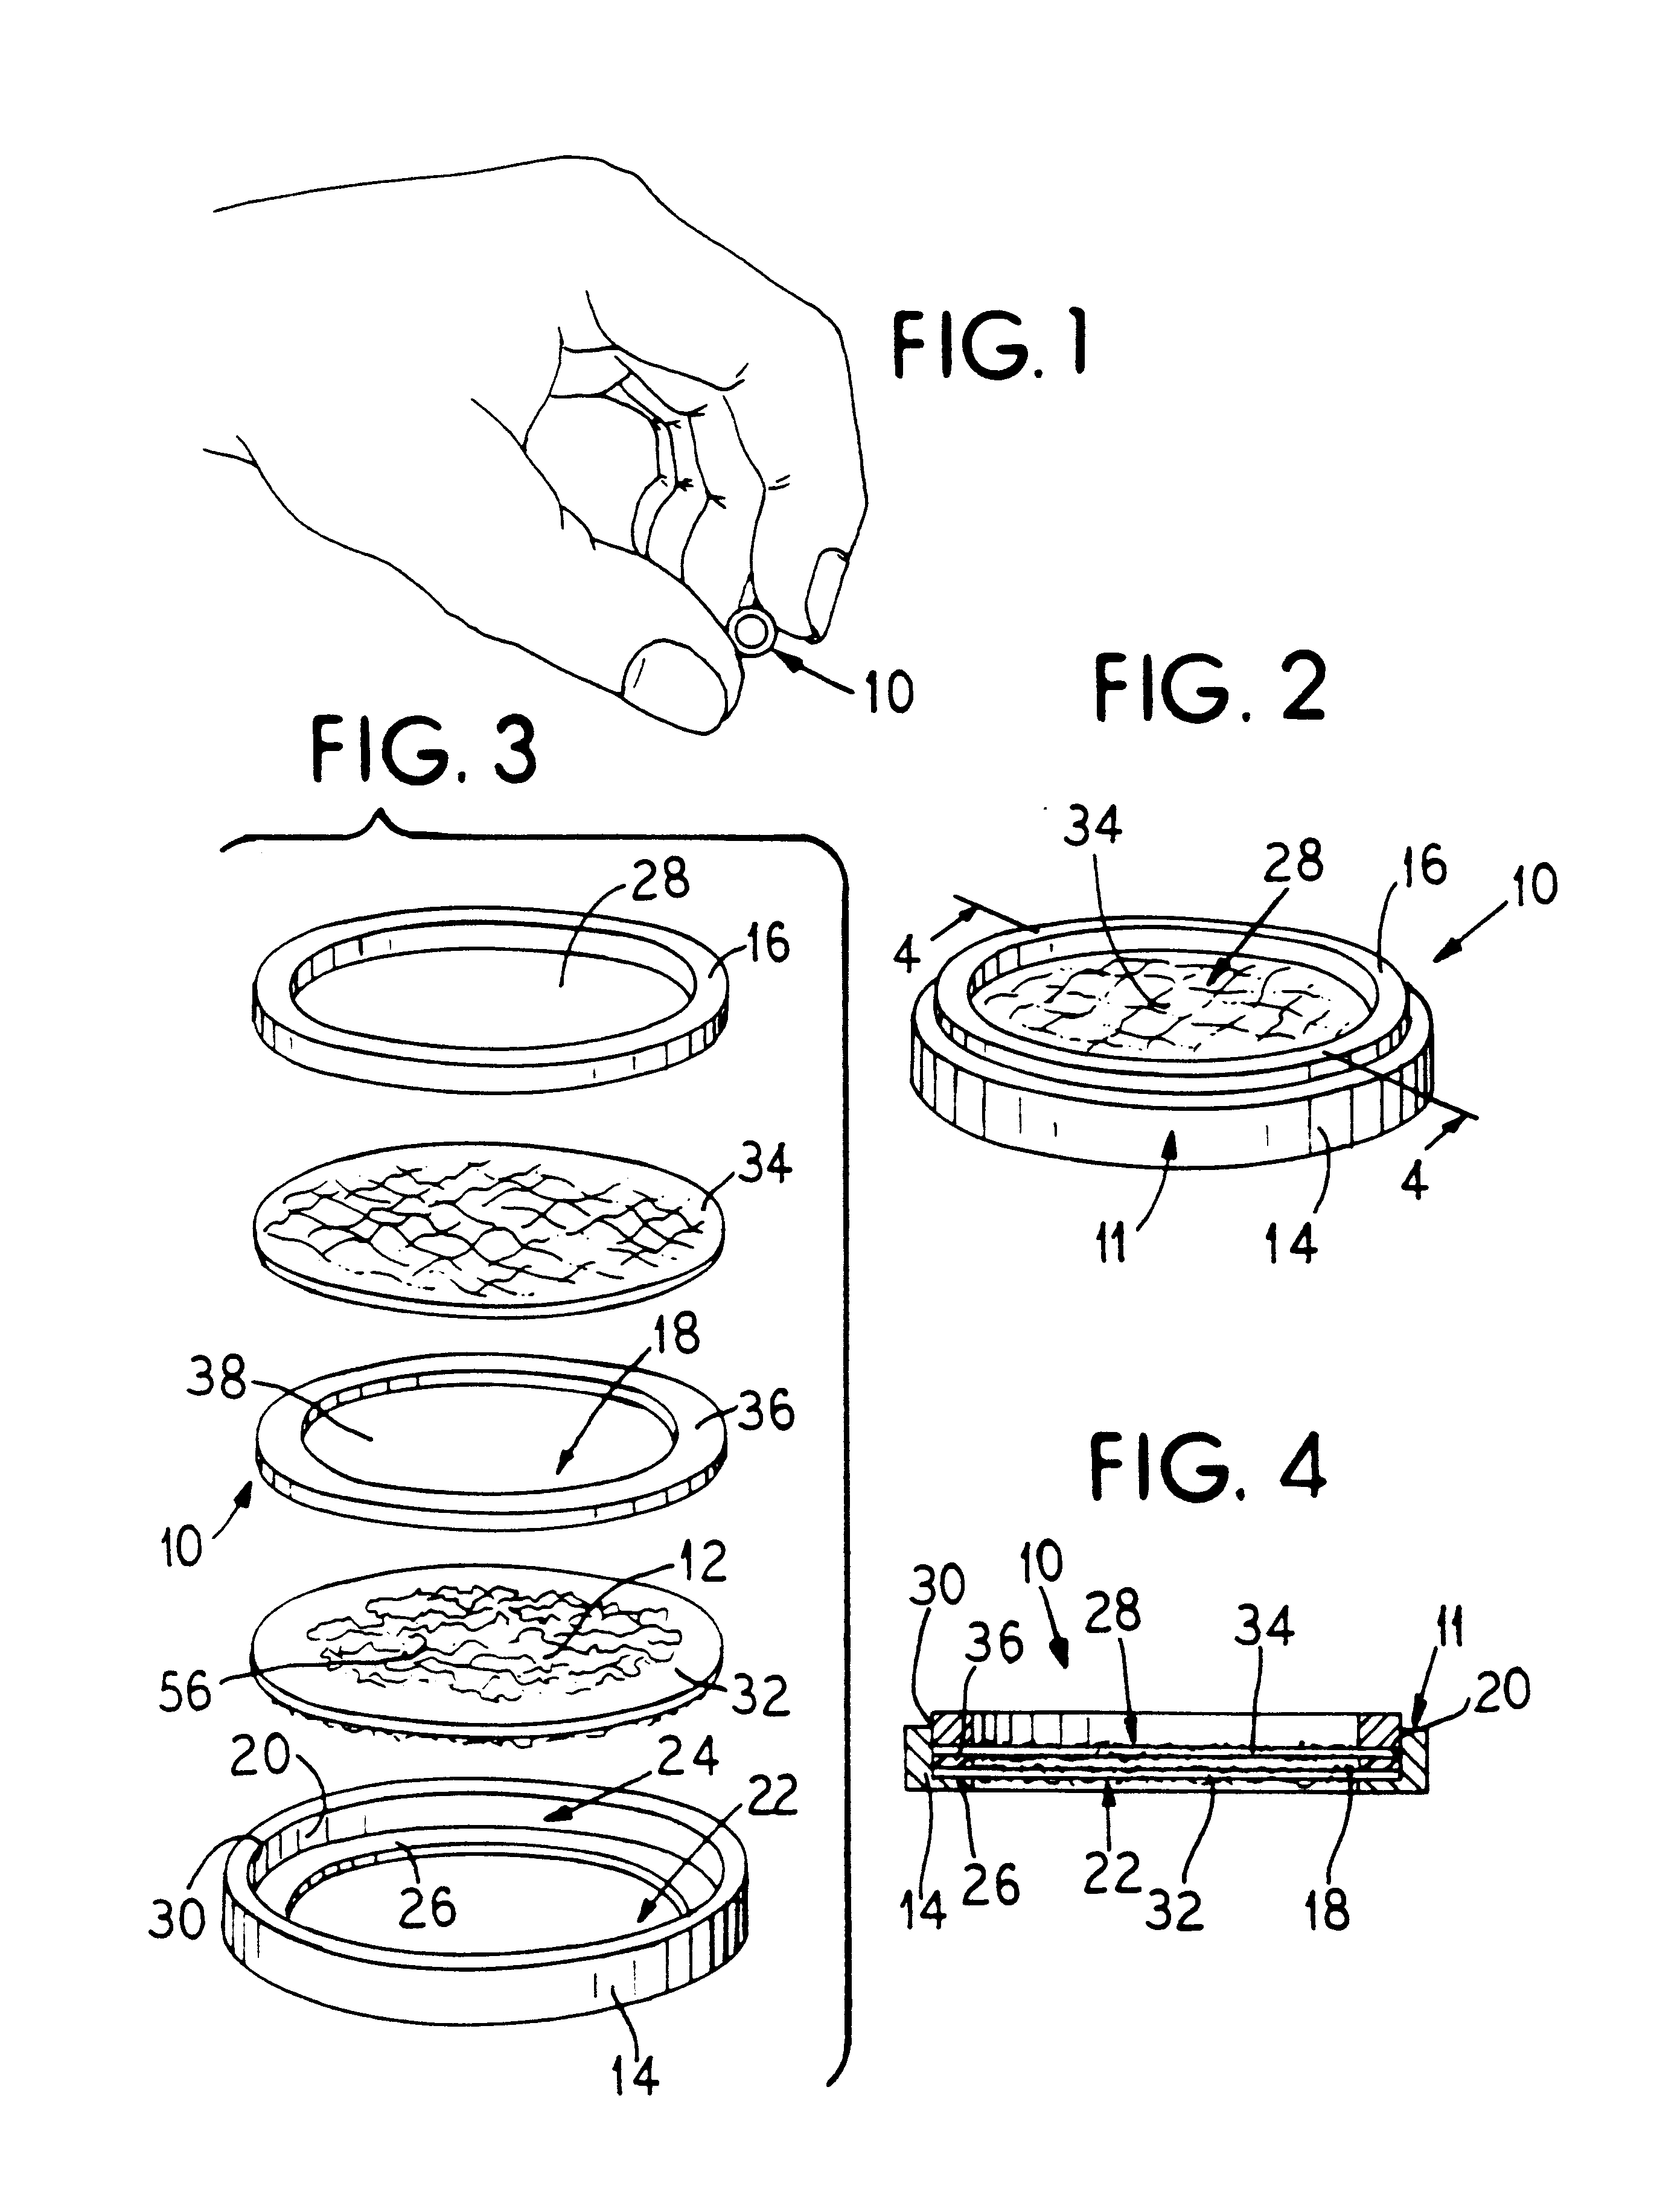 Angiogenic tissue implant systems and methods